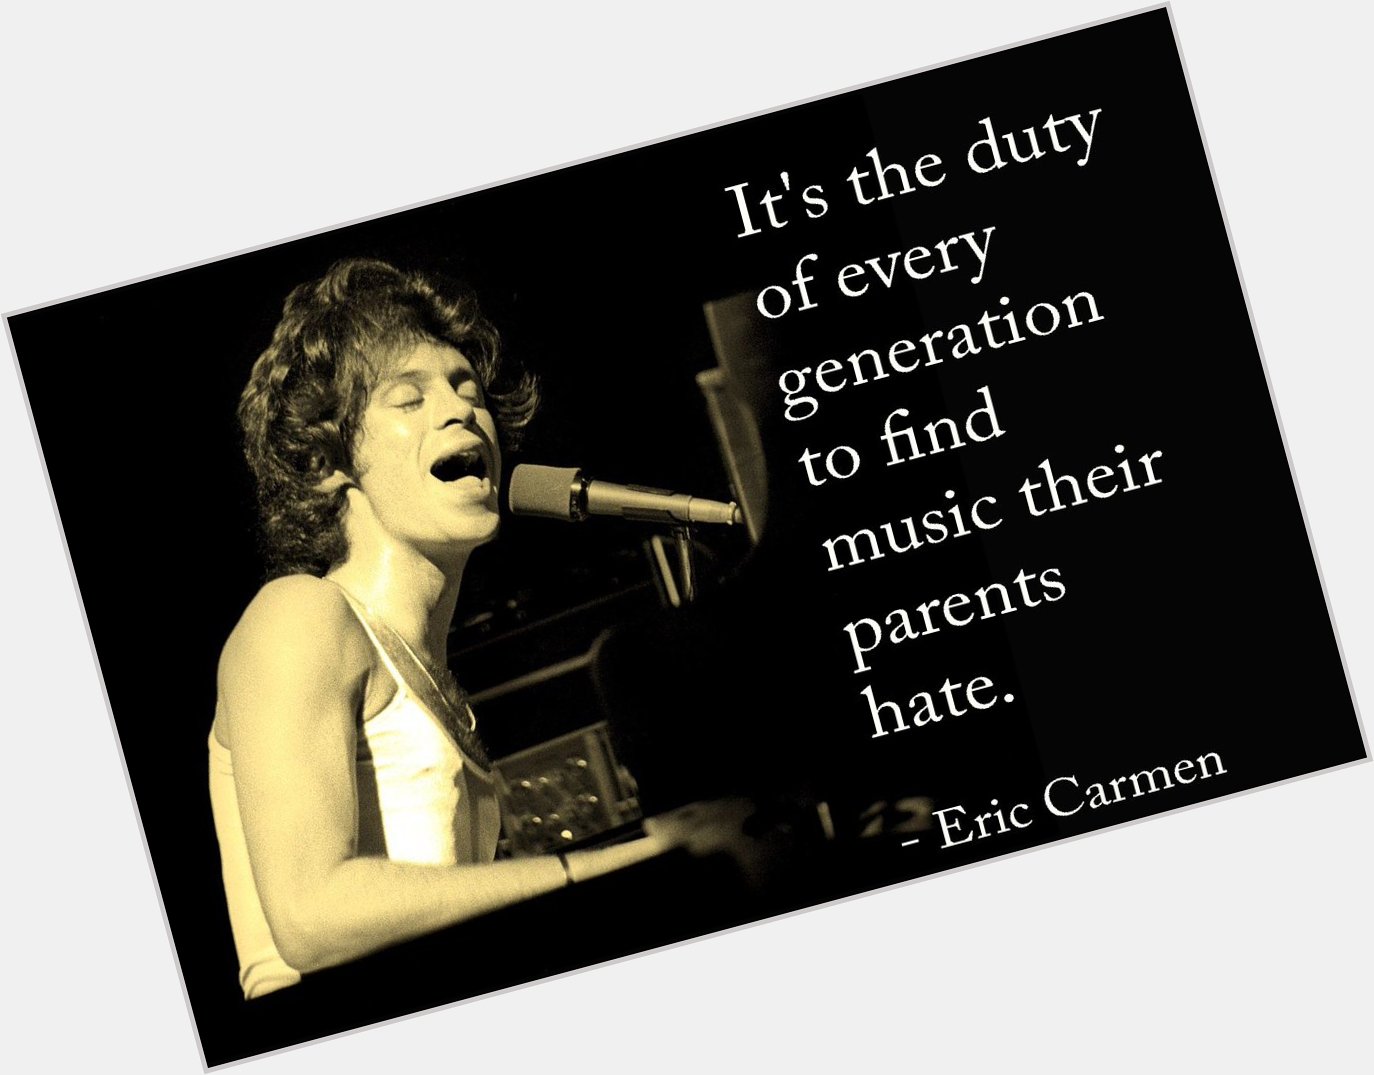 Happy 72nd Birthday to Eric Carmen, who was born in Cleveland, Ohio on this day in 1949. 